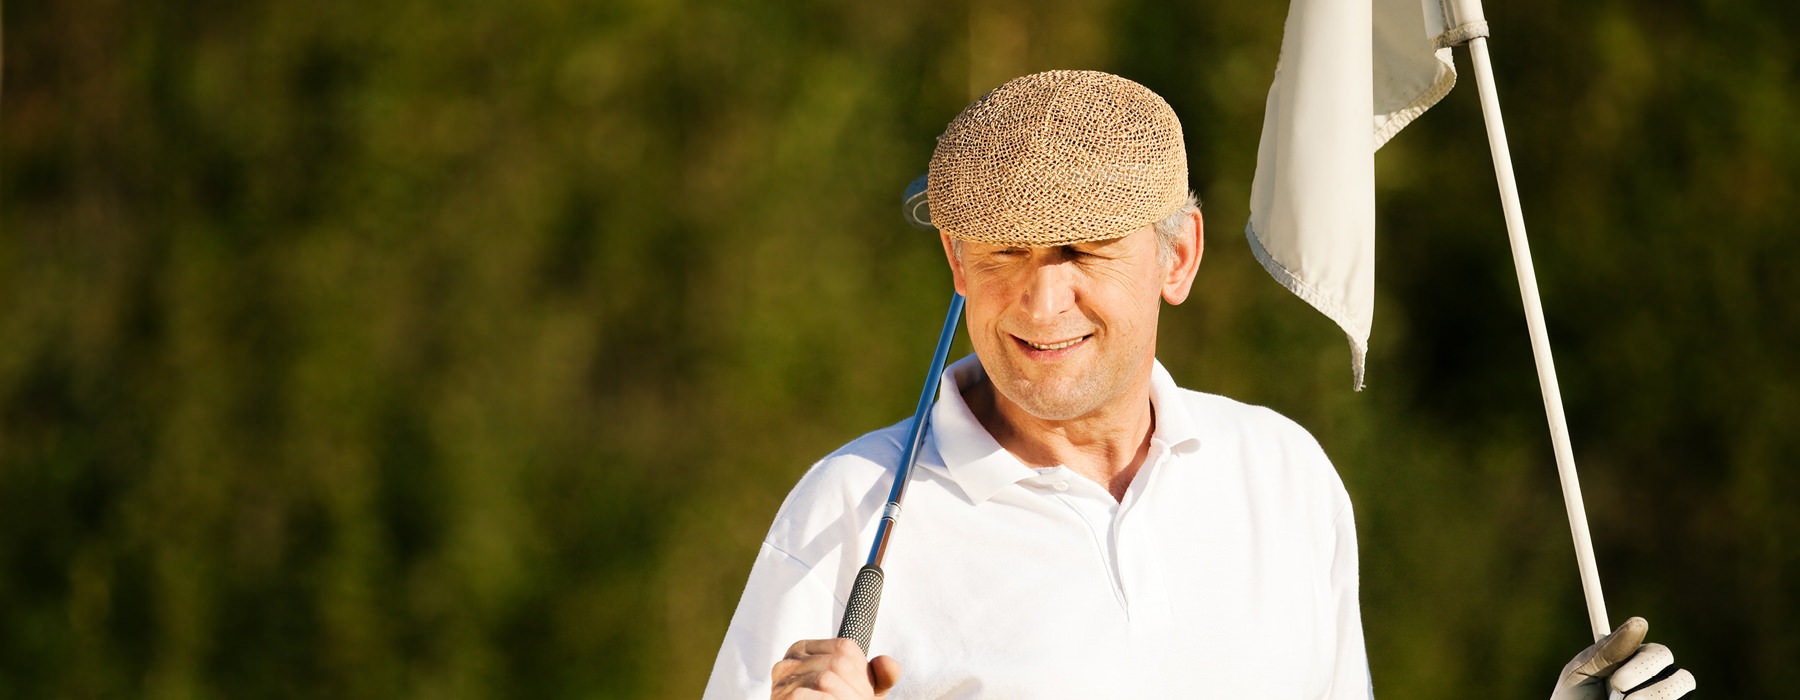 older man hold a golf club and hole flag on golf course